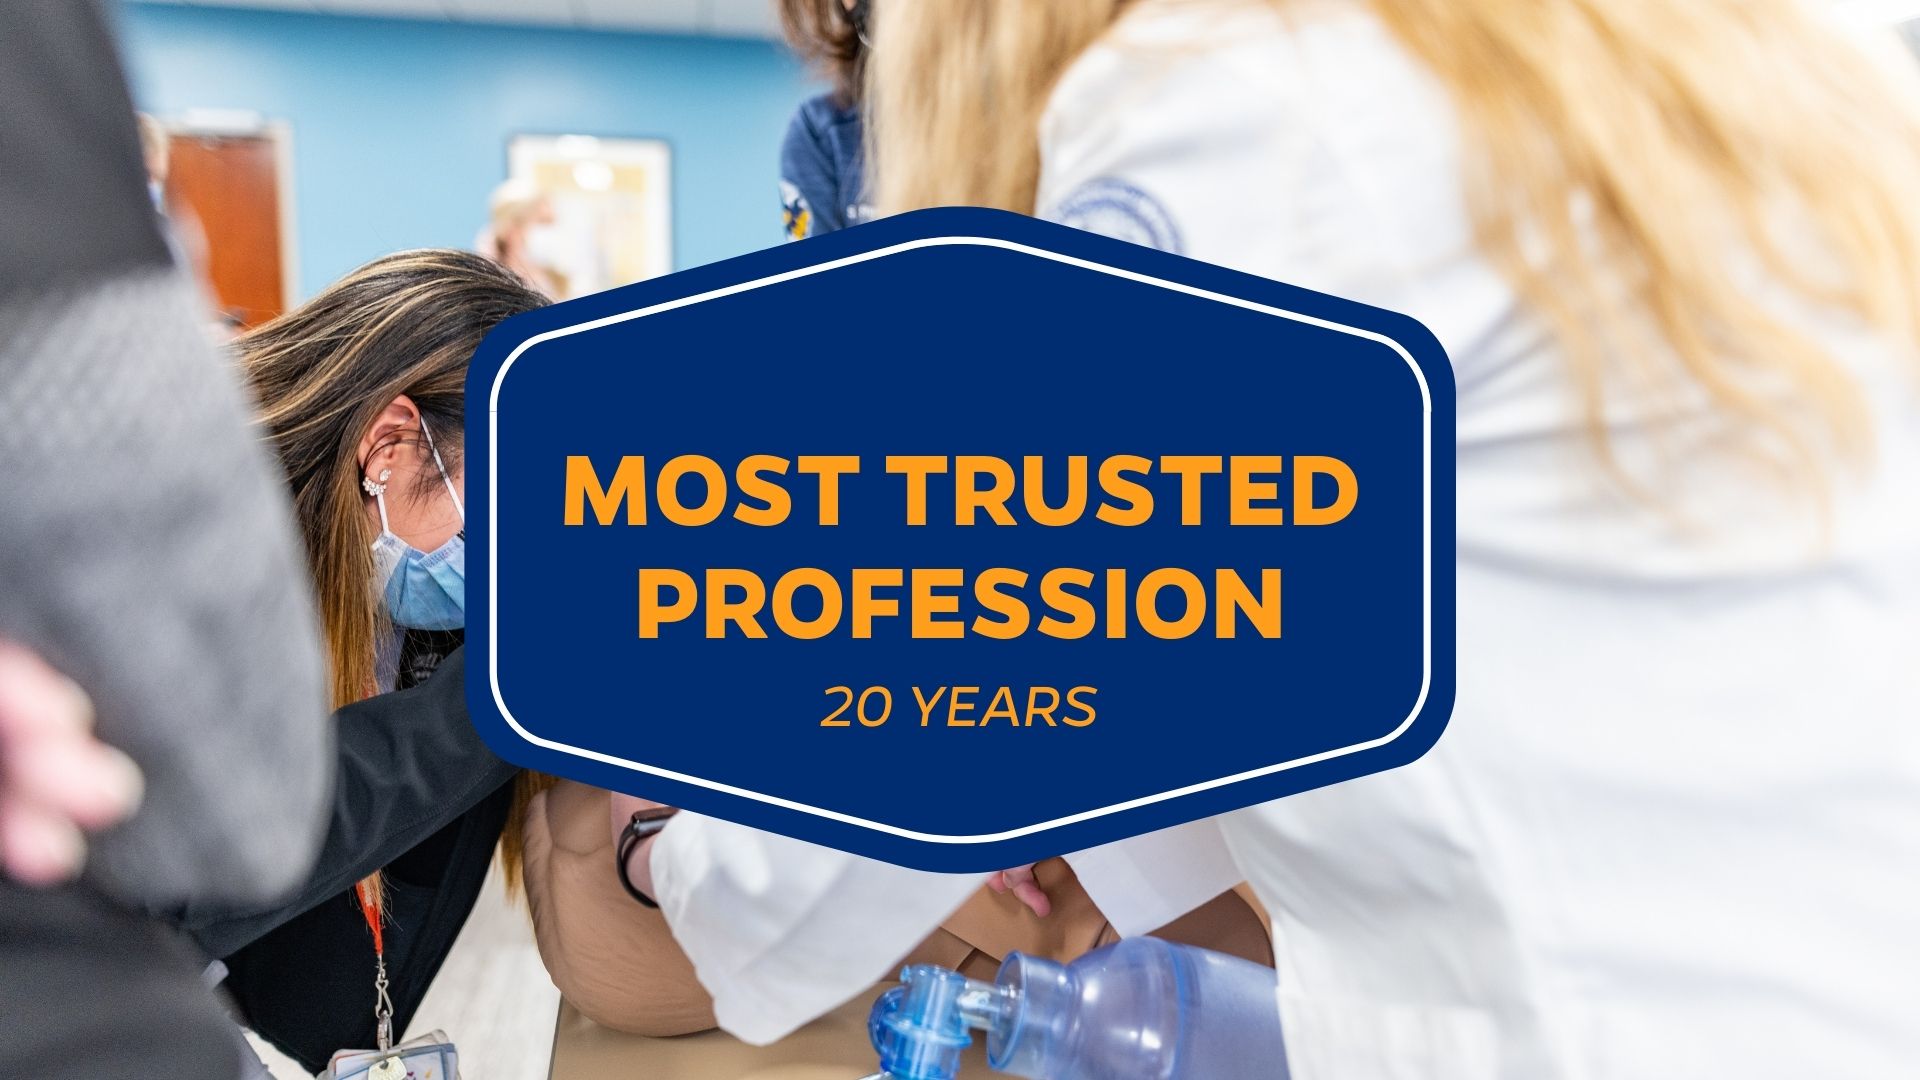 Nurses Have Been the “Most Trusted Profession” for 20 Years in a Row